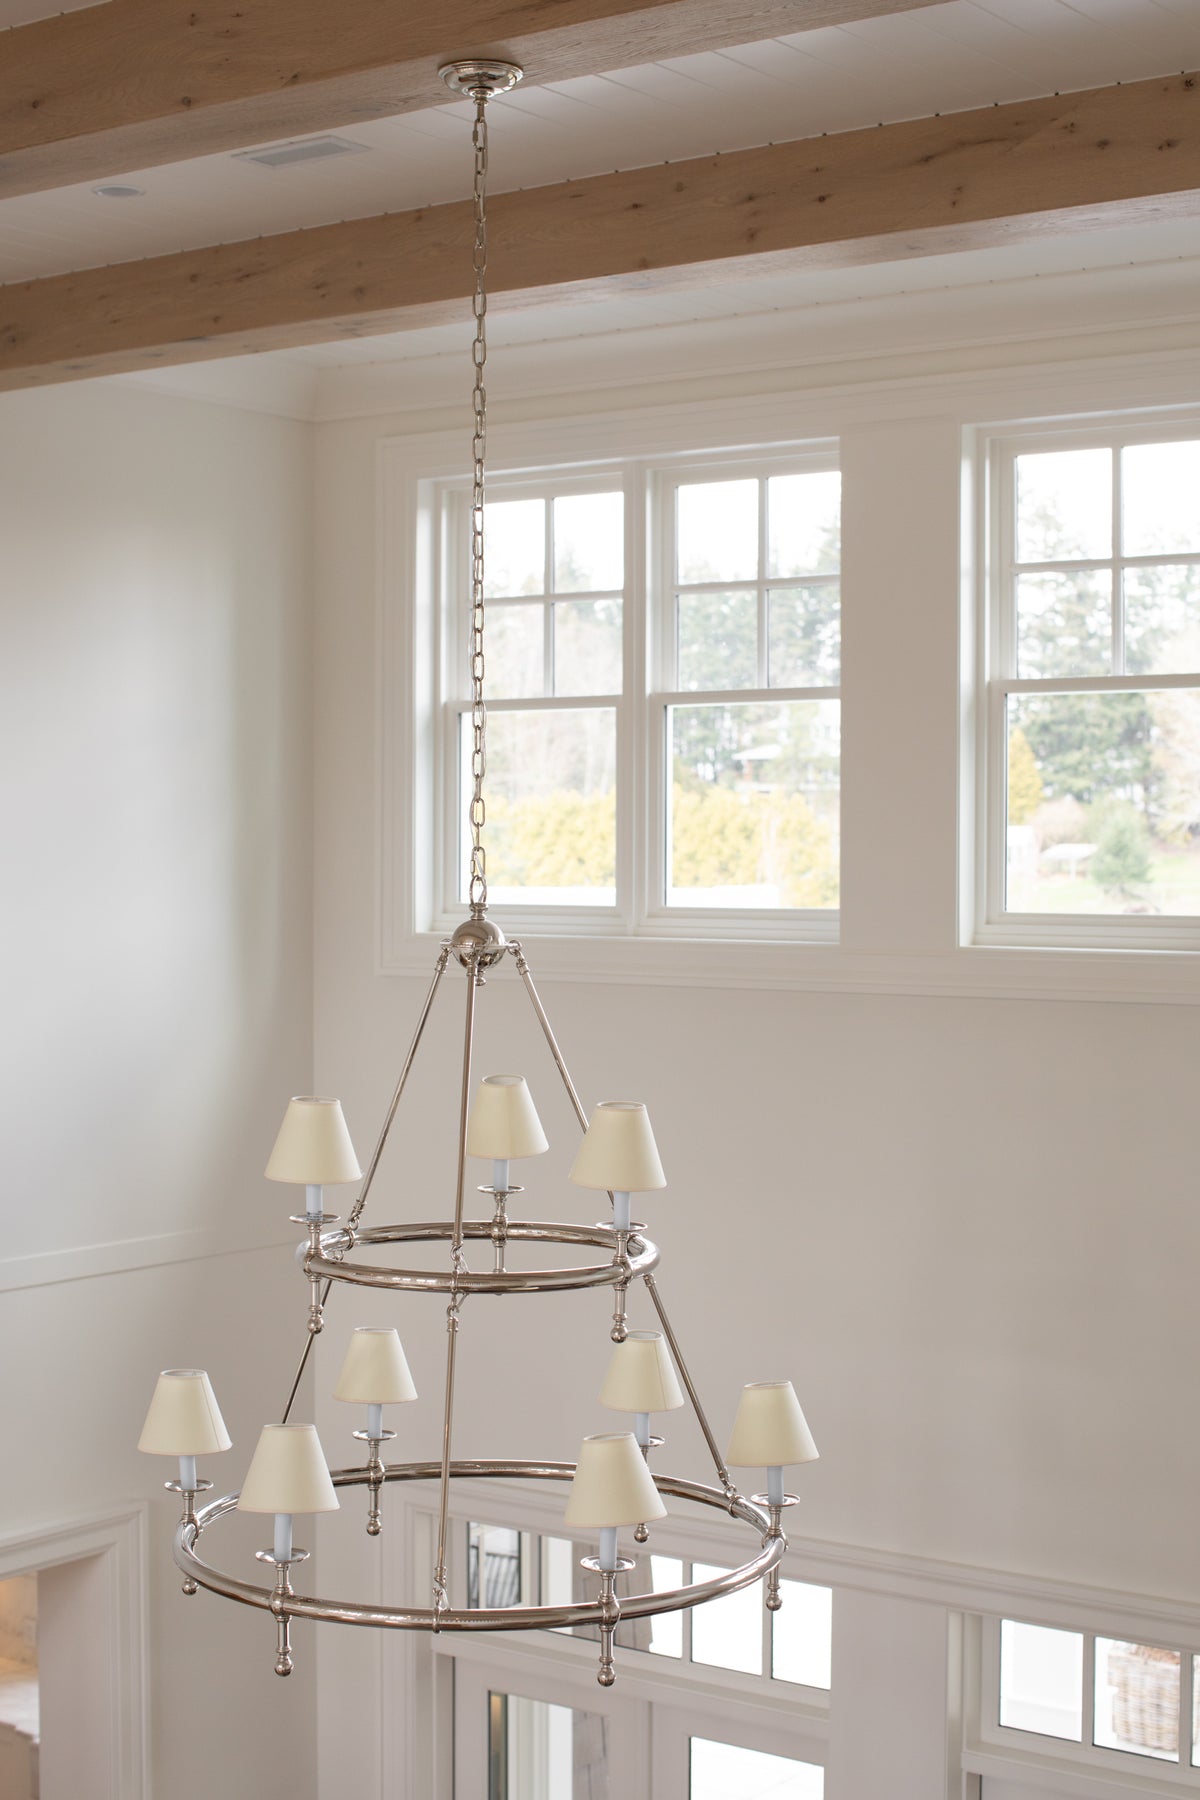 Buy Classic Two-Tier Ring Chandelier By Visual Comfort